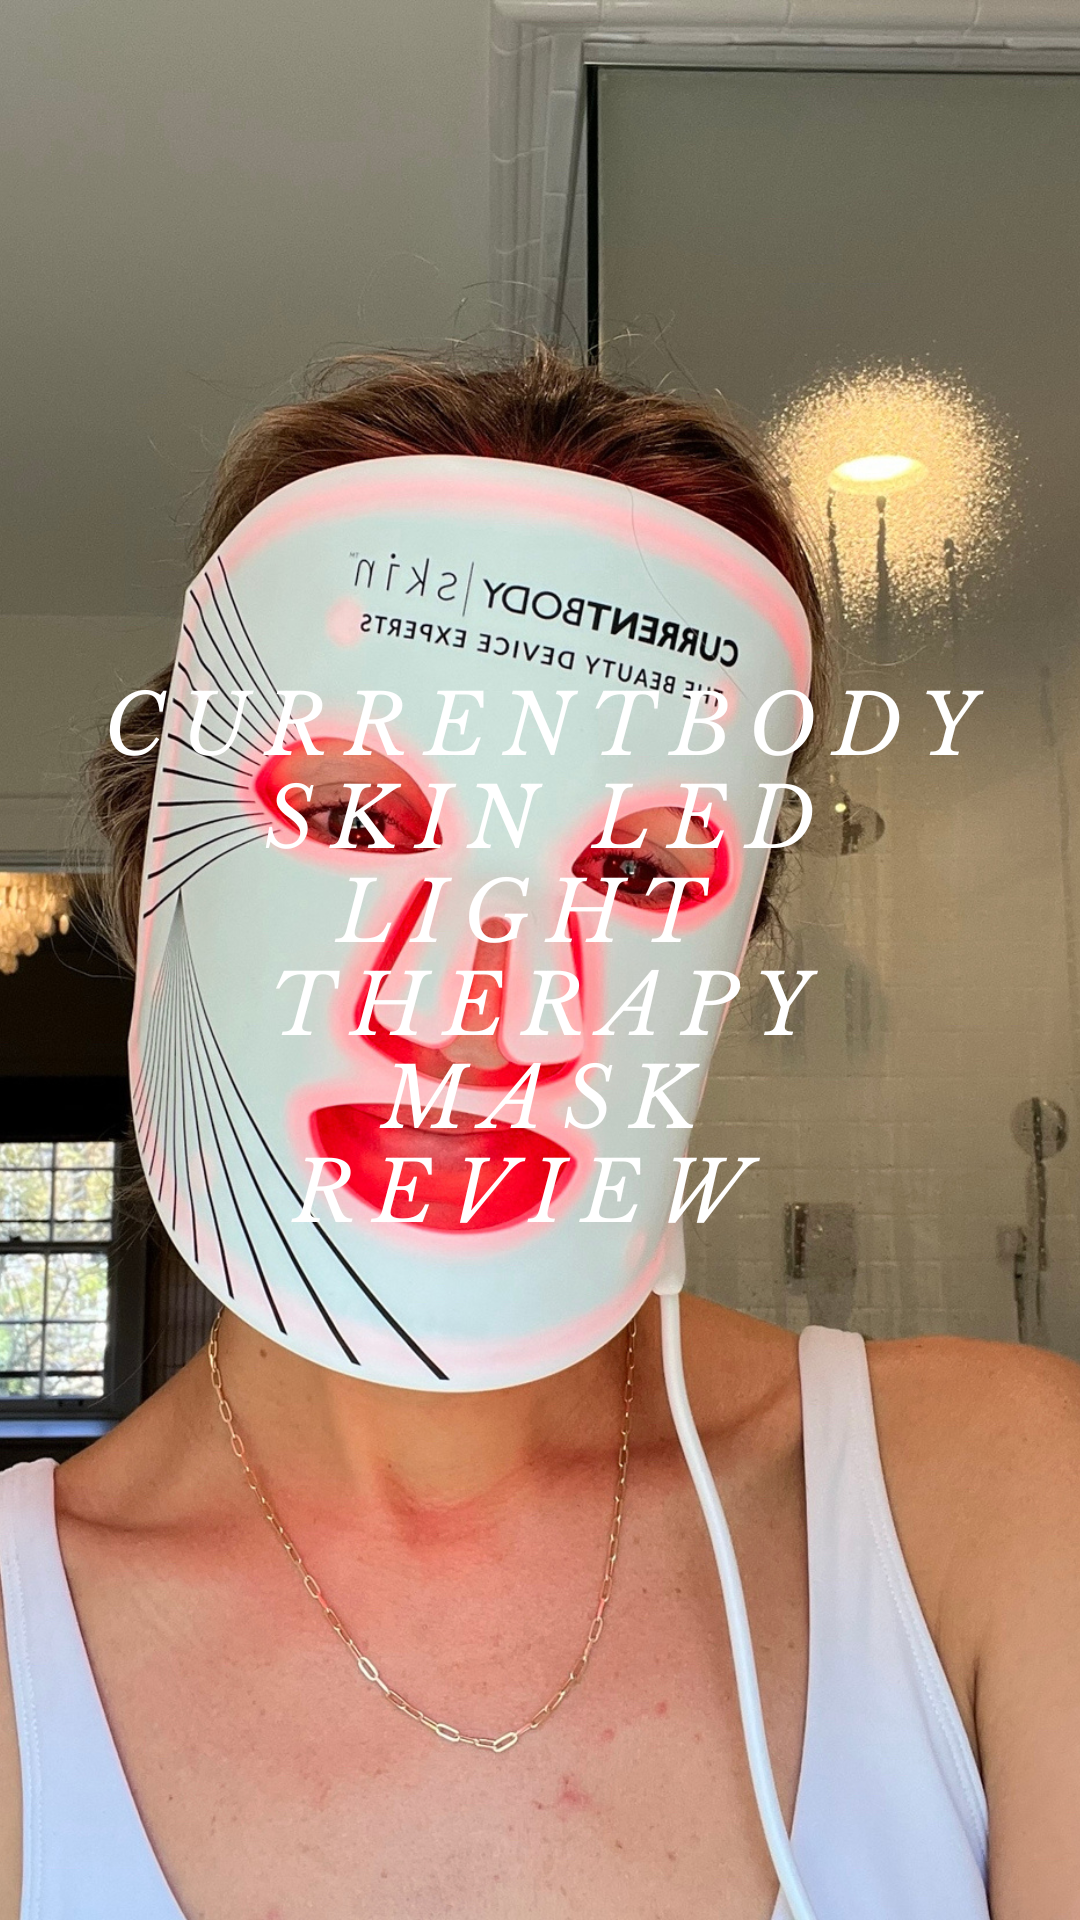 currentbody led mask review